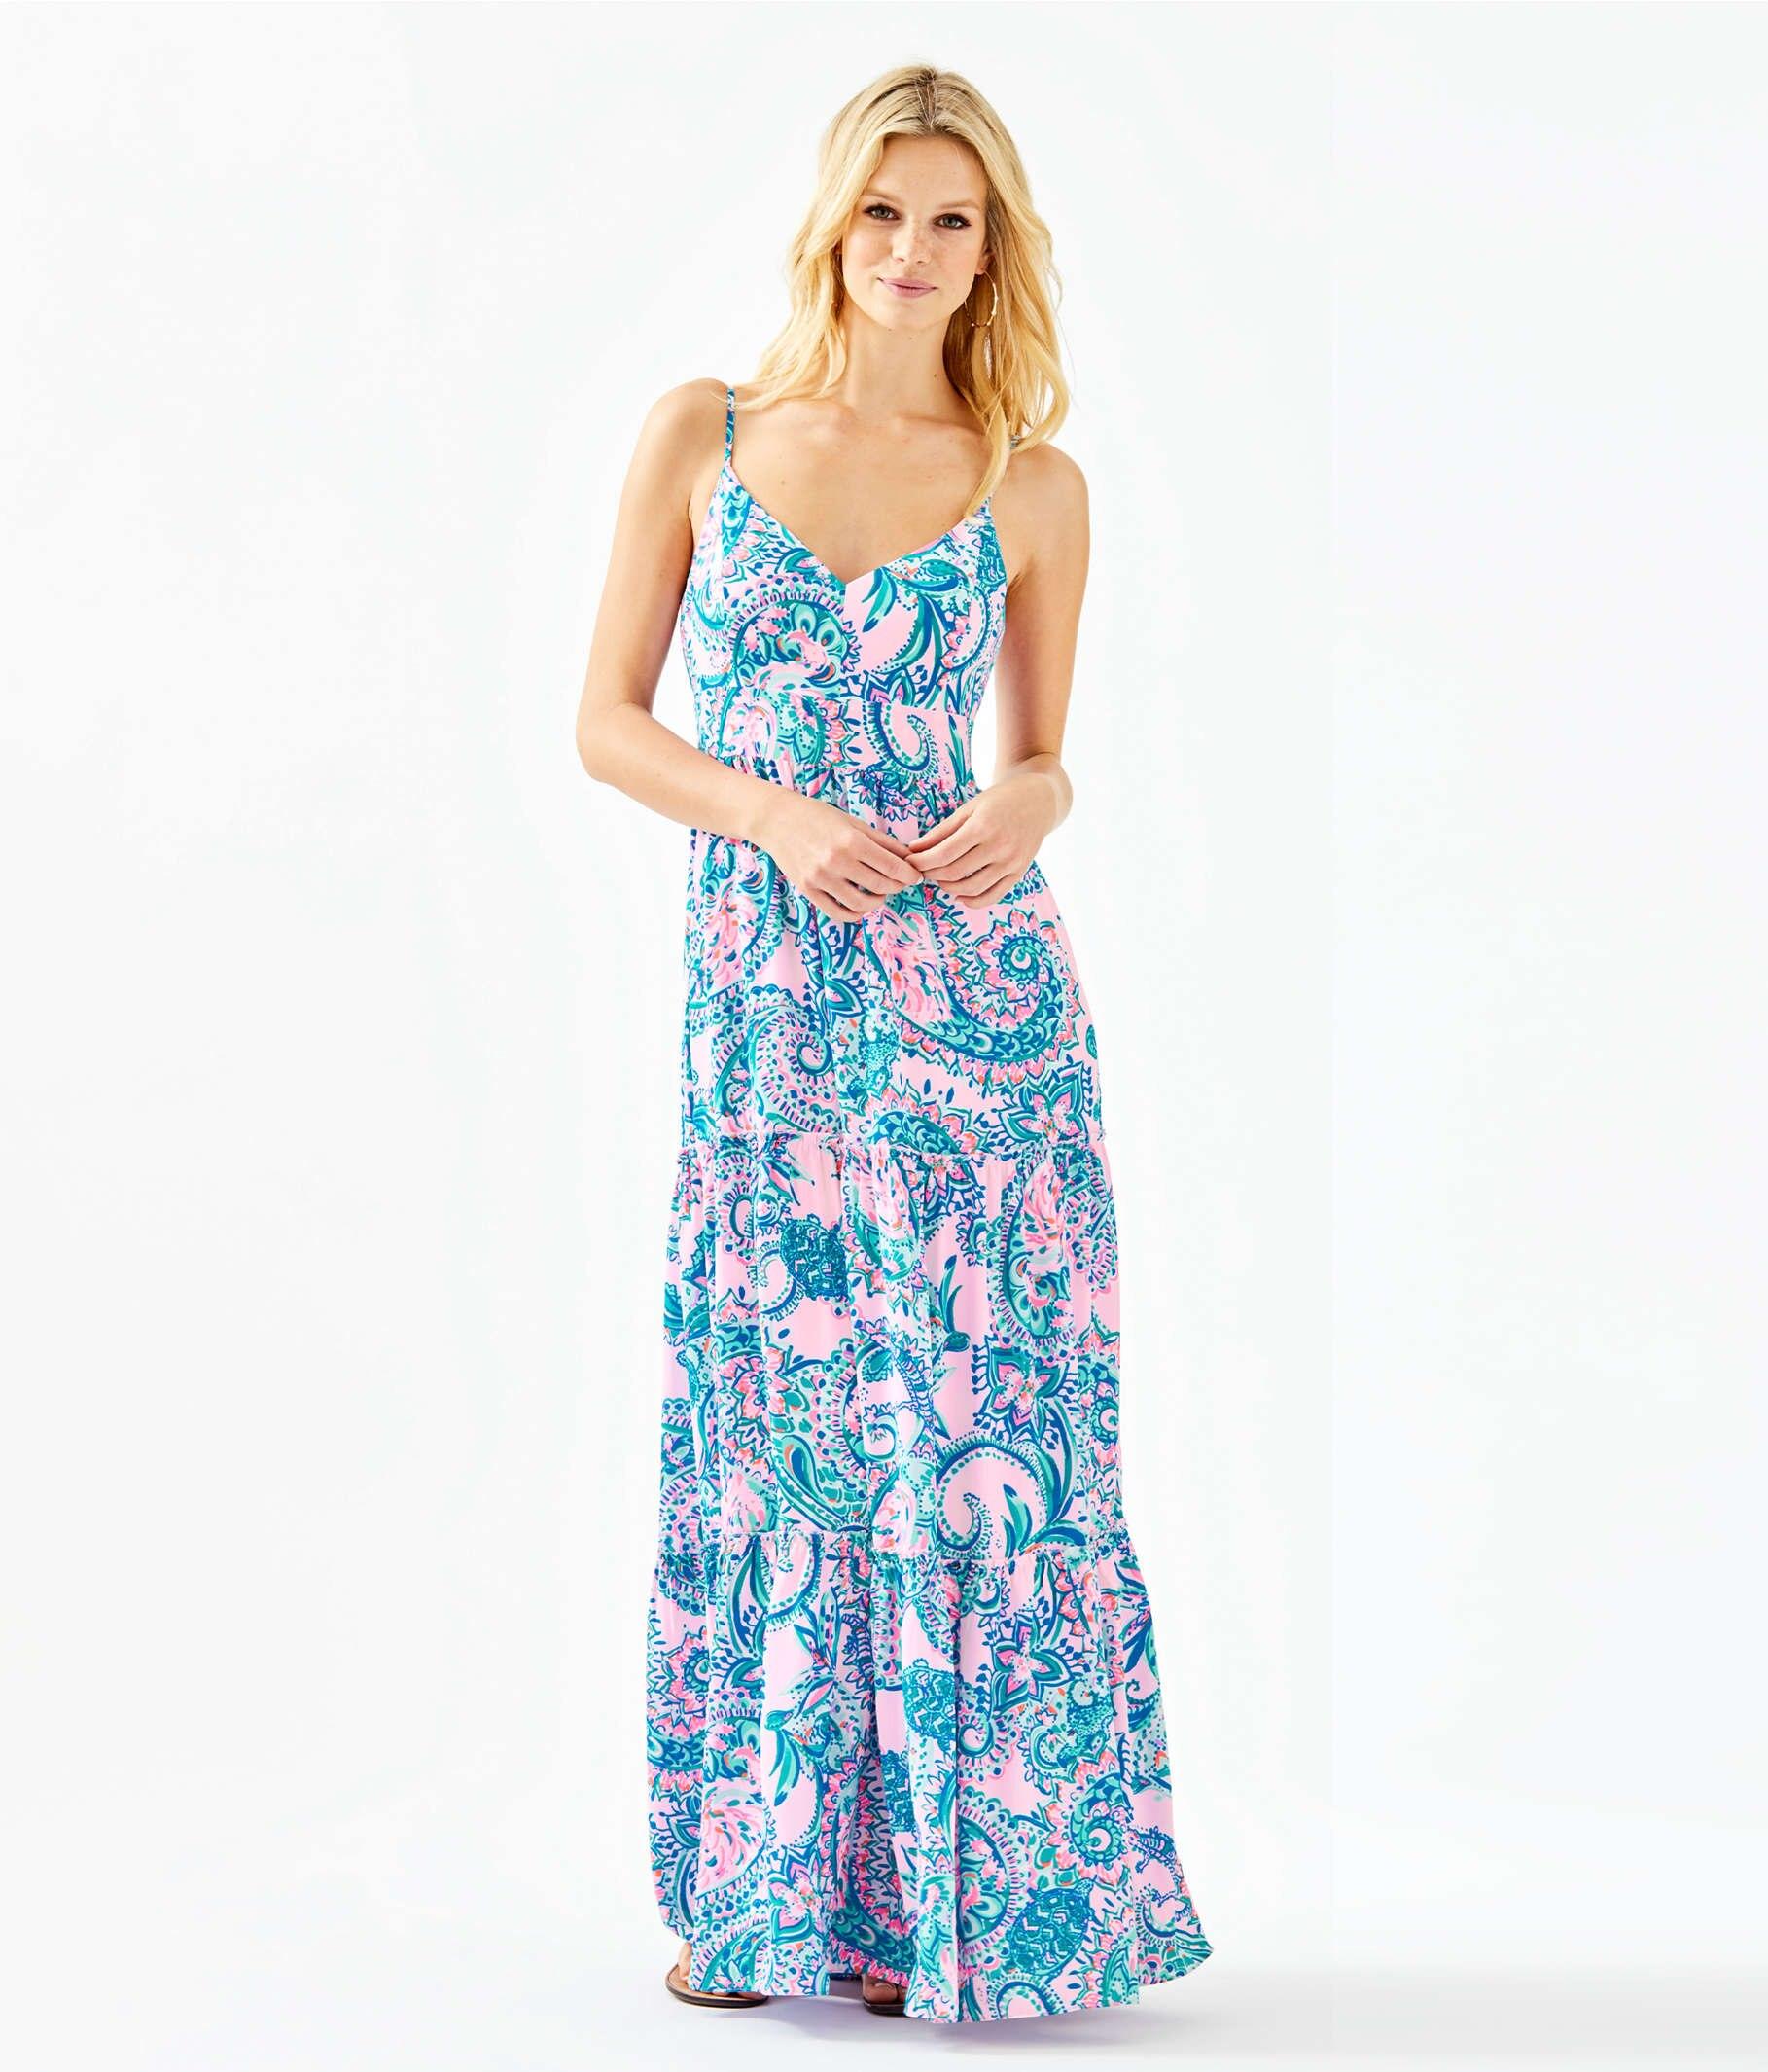 Lilly Pulitzer Melody Maxi Dress in Blue - Lyst